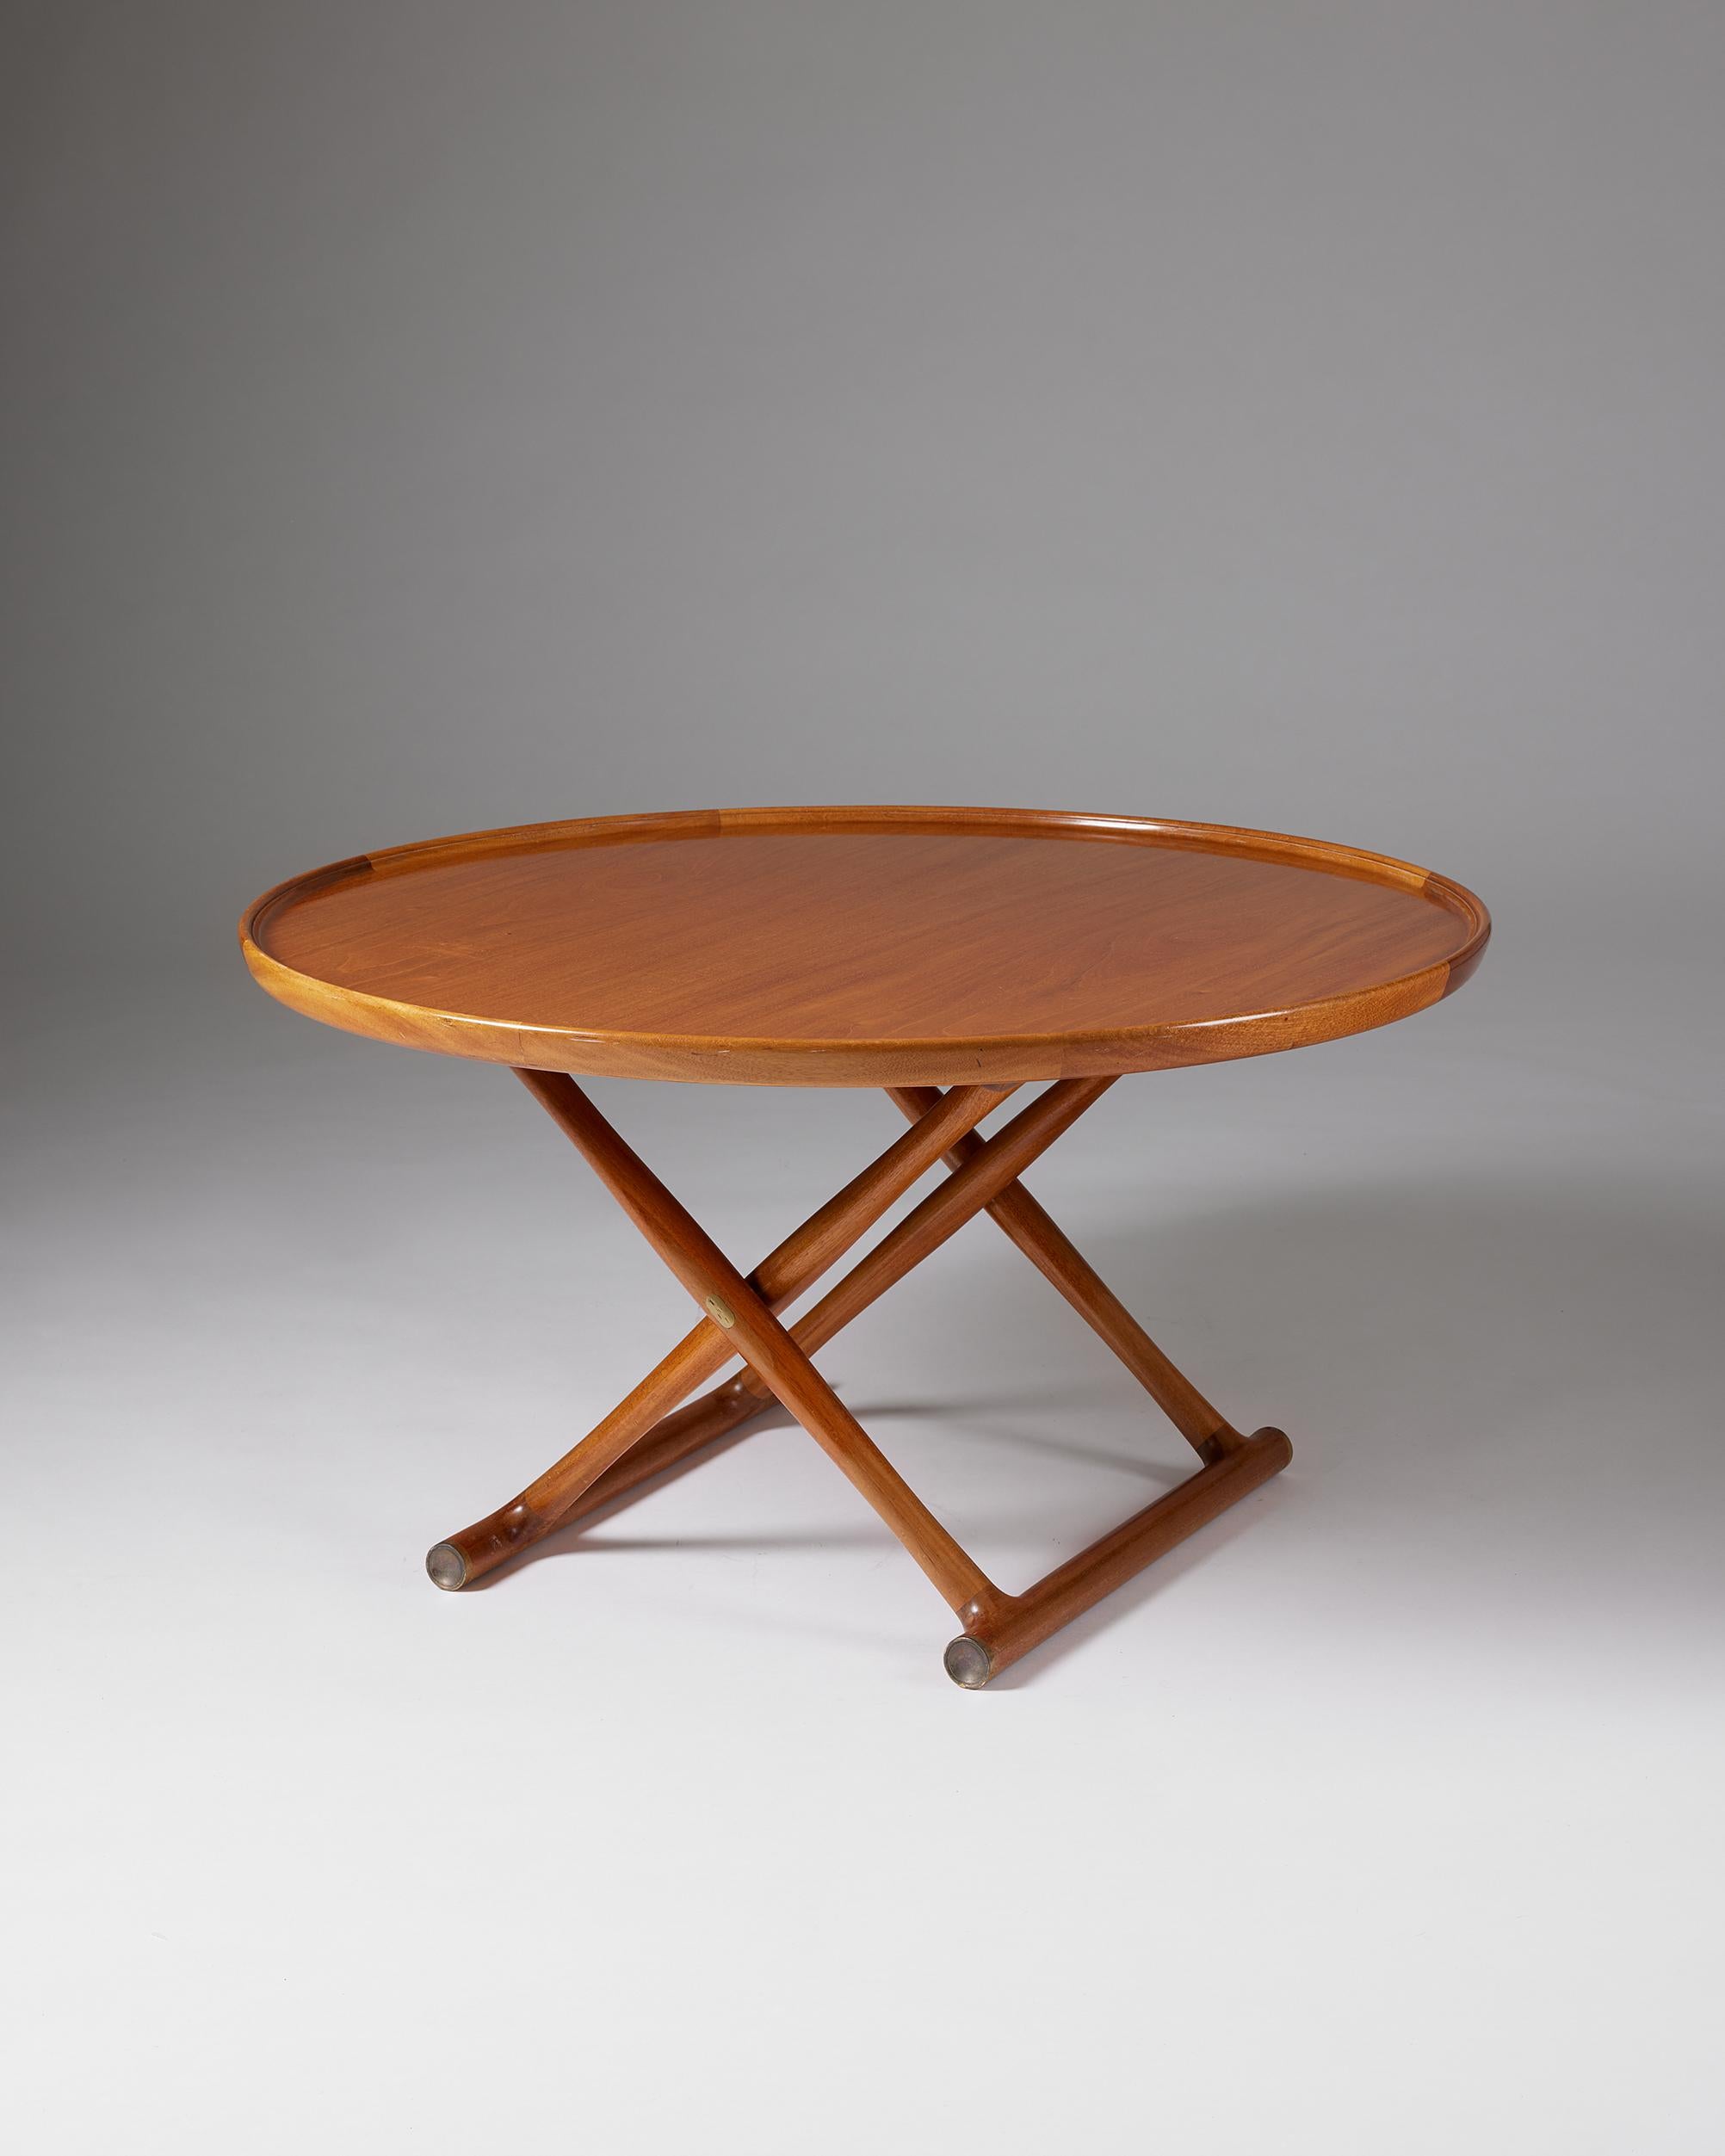 Occasional table ‘The Egyptian Table’ designed by Mogens Lassen for A.J. Iversen,
Denmark, 1960s.

Mahogany, foldable frame and top with raised edge, brass fittings.

With this occasional table model, Mogens Lassen created an icon of